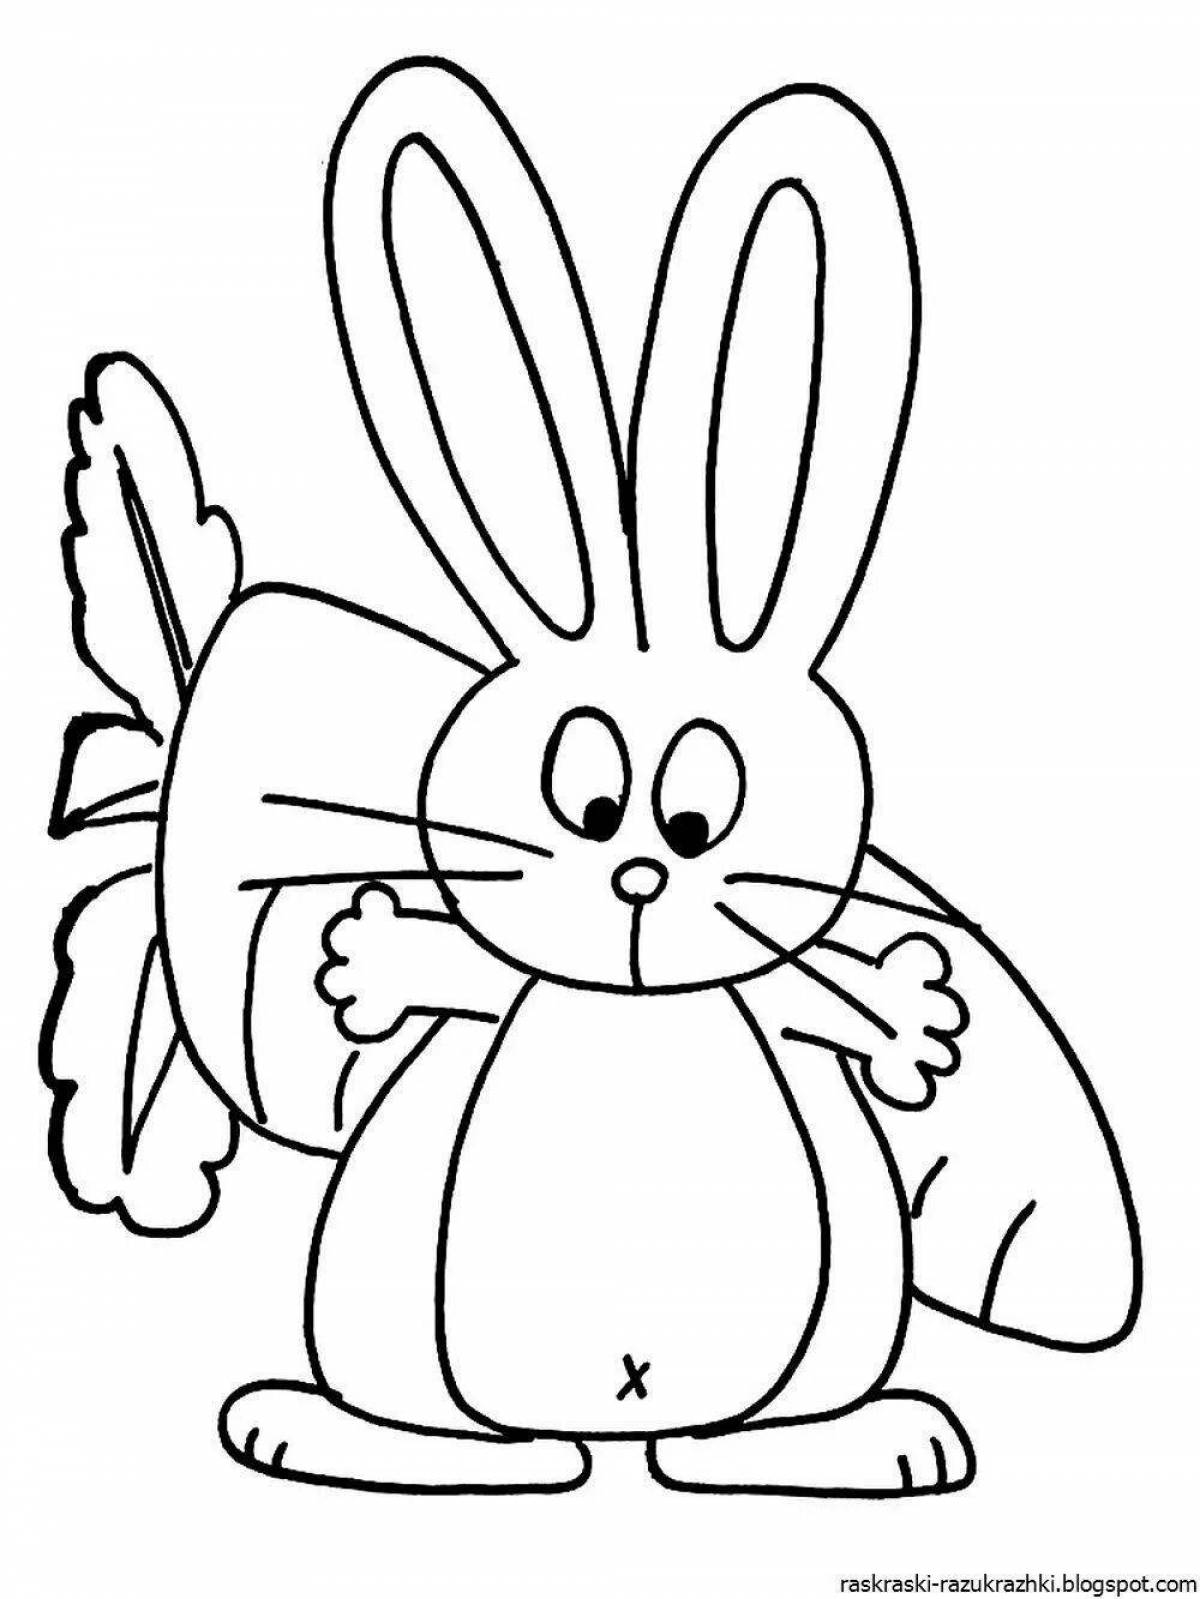 Expressive drawing of a rabbit for children